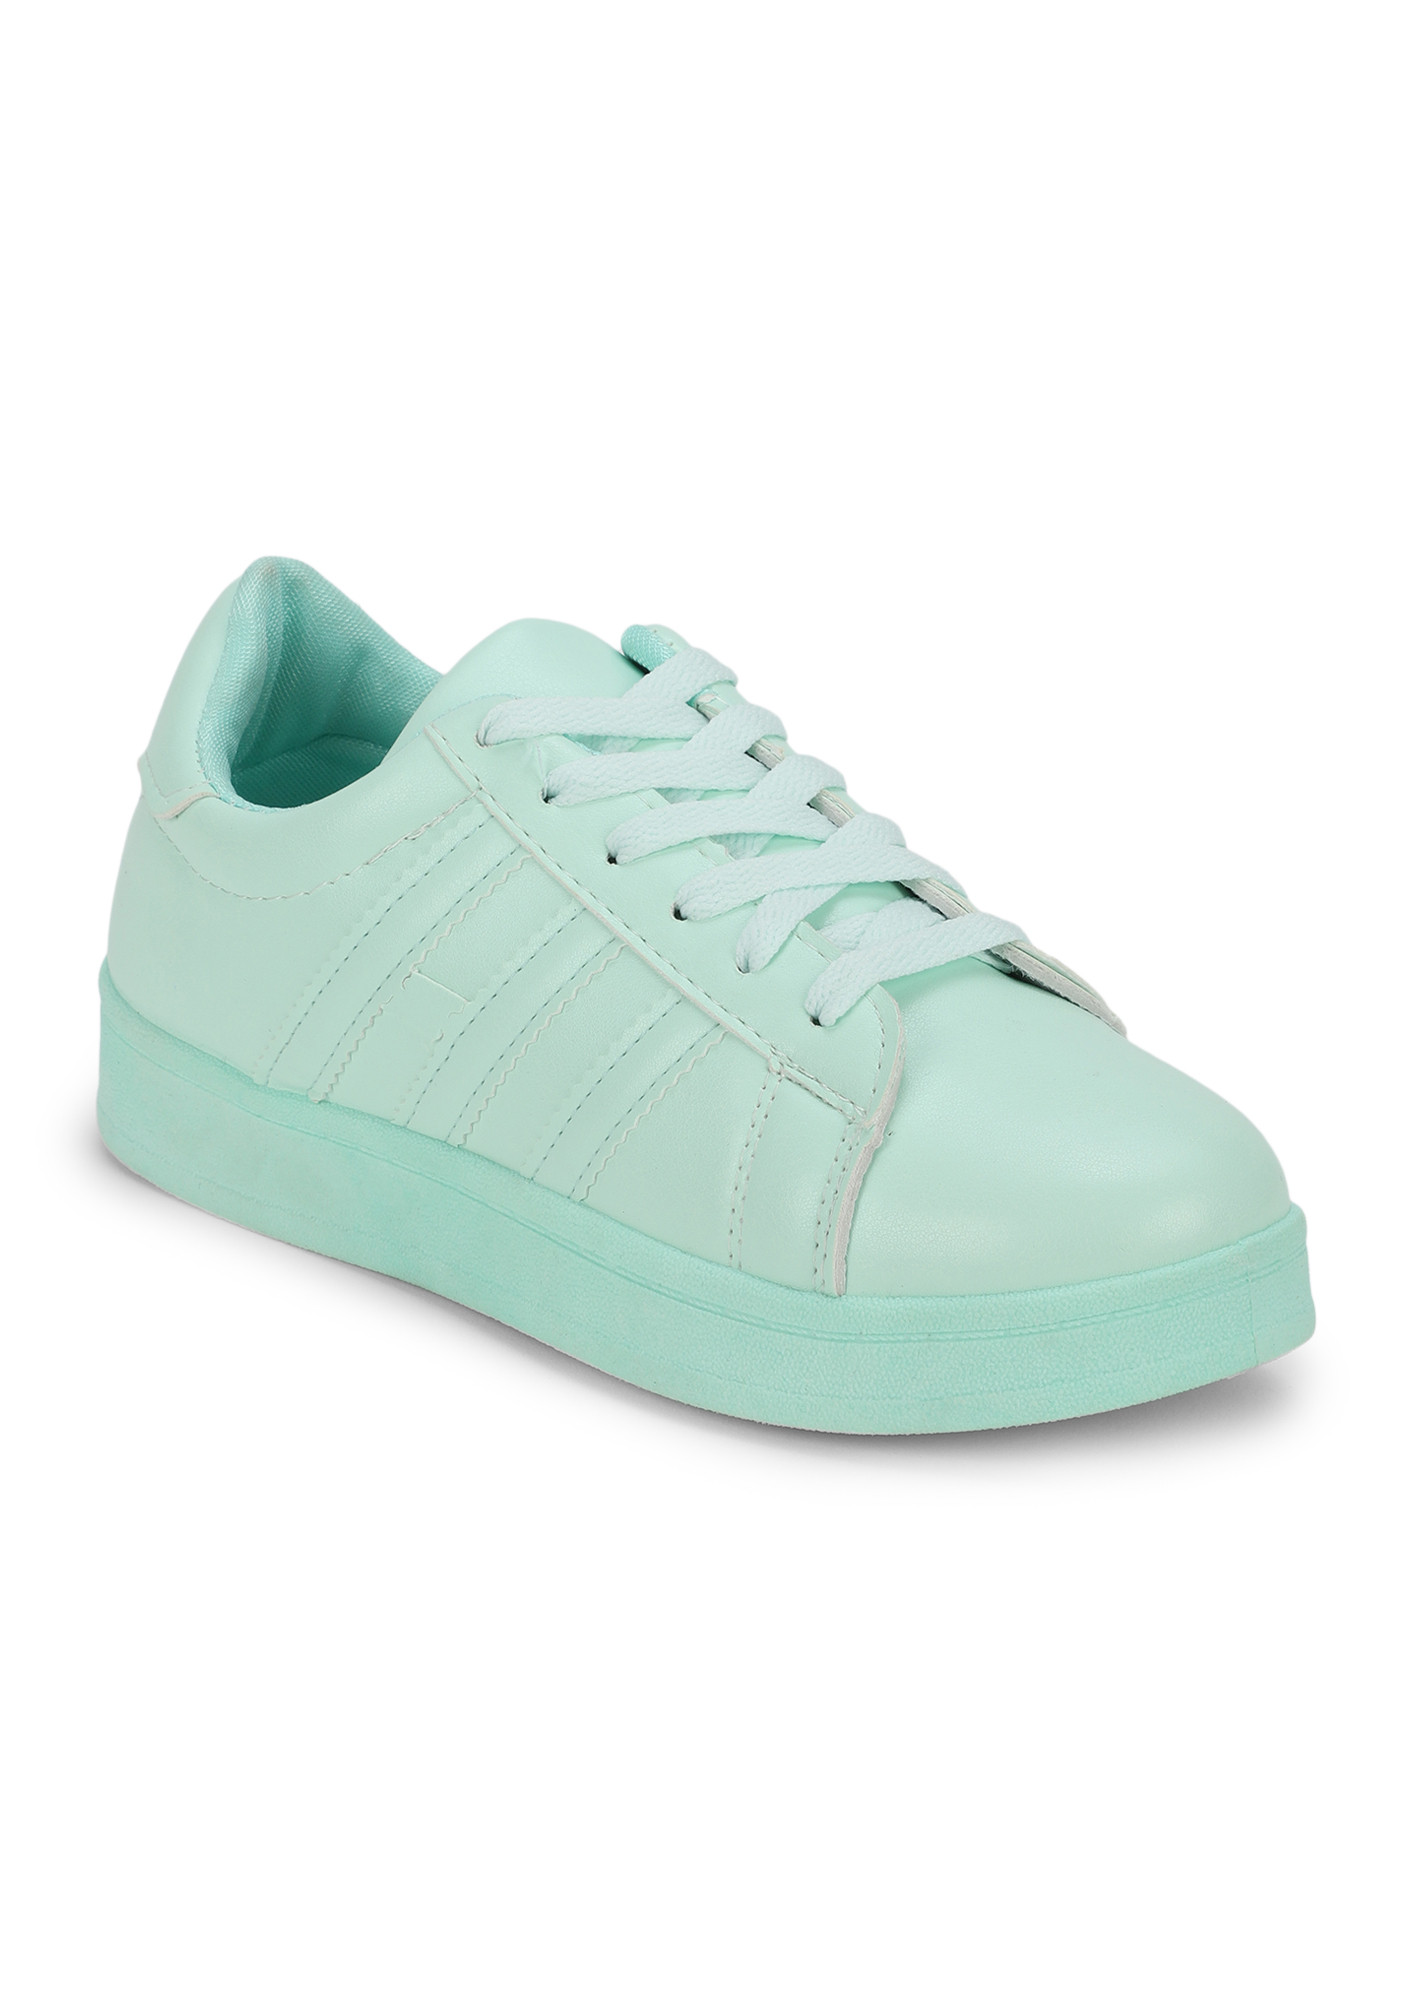 GAME ON MINT TRAINERS